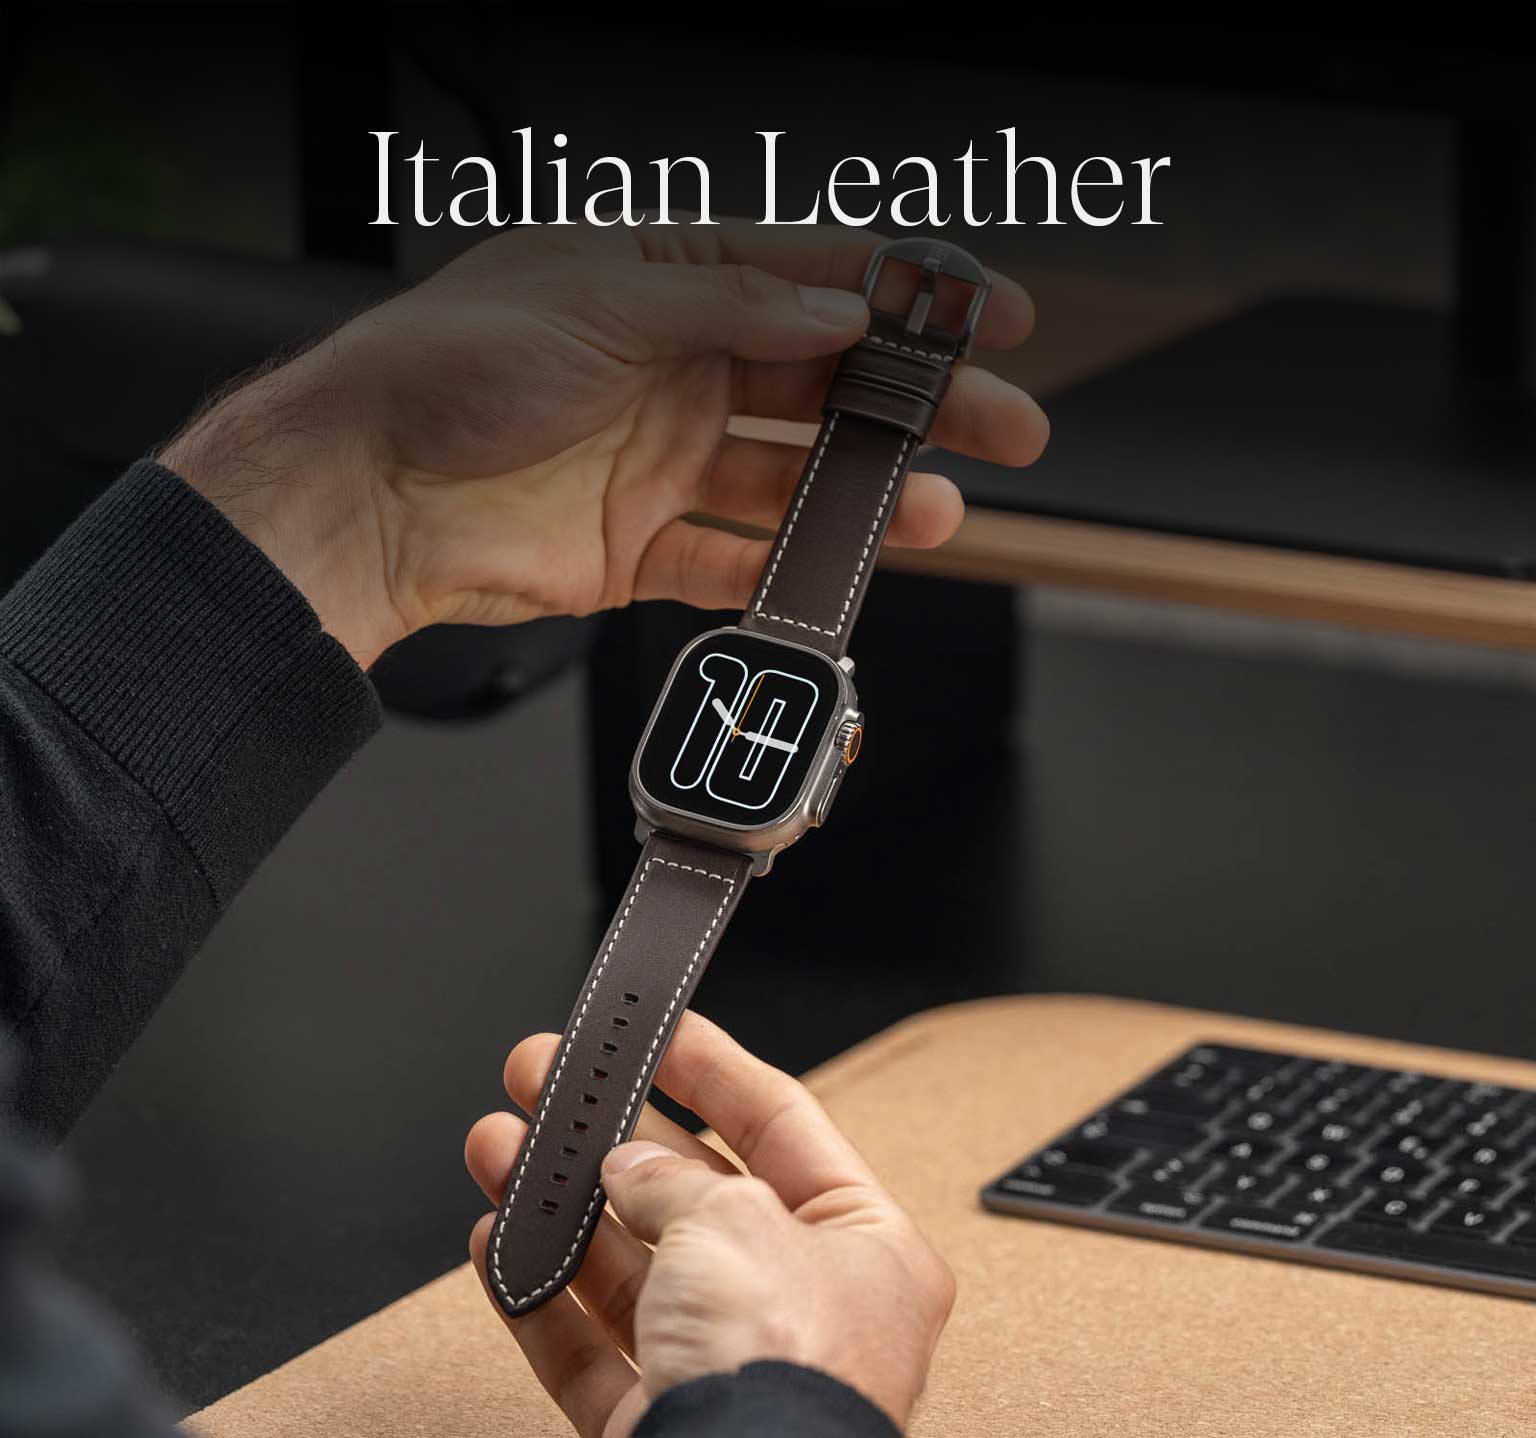 Waterproof Leather Band | Espresso